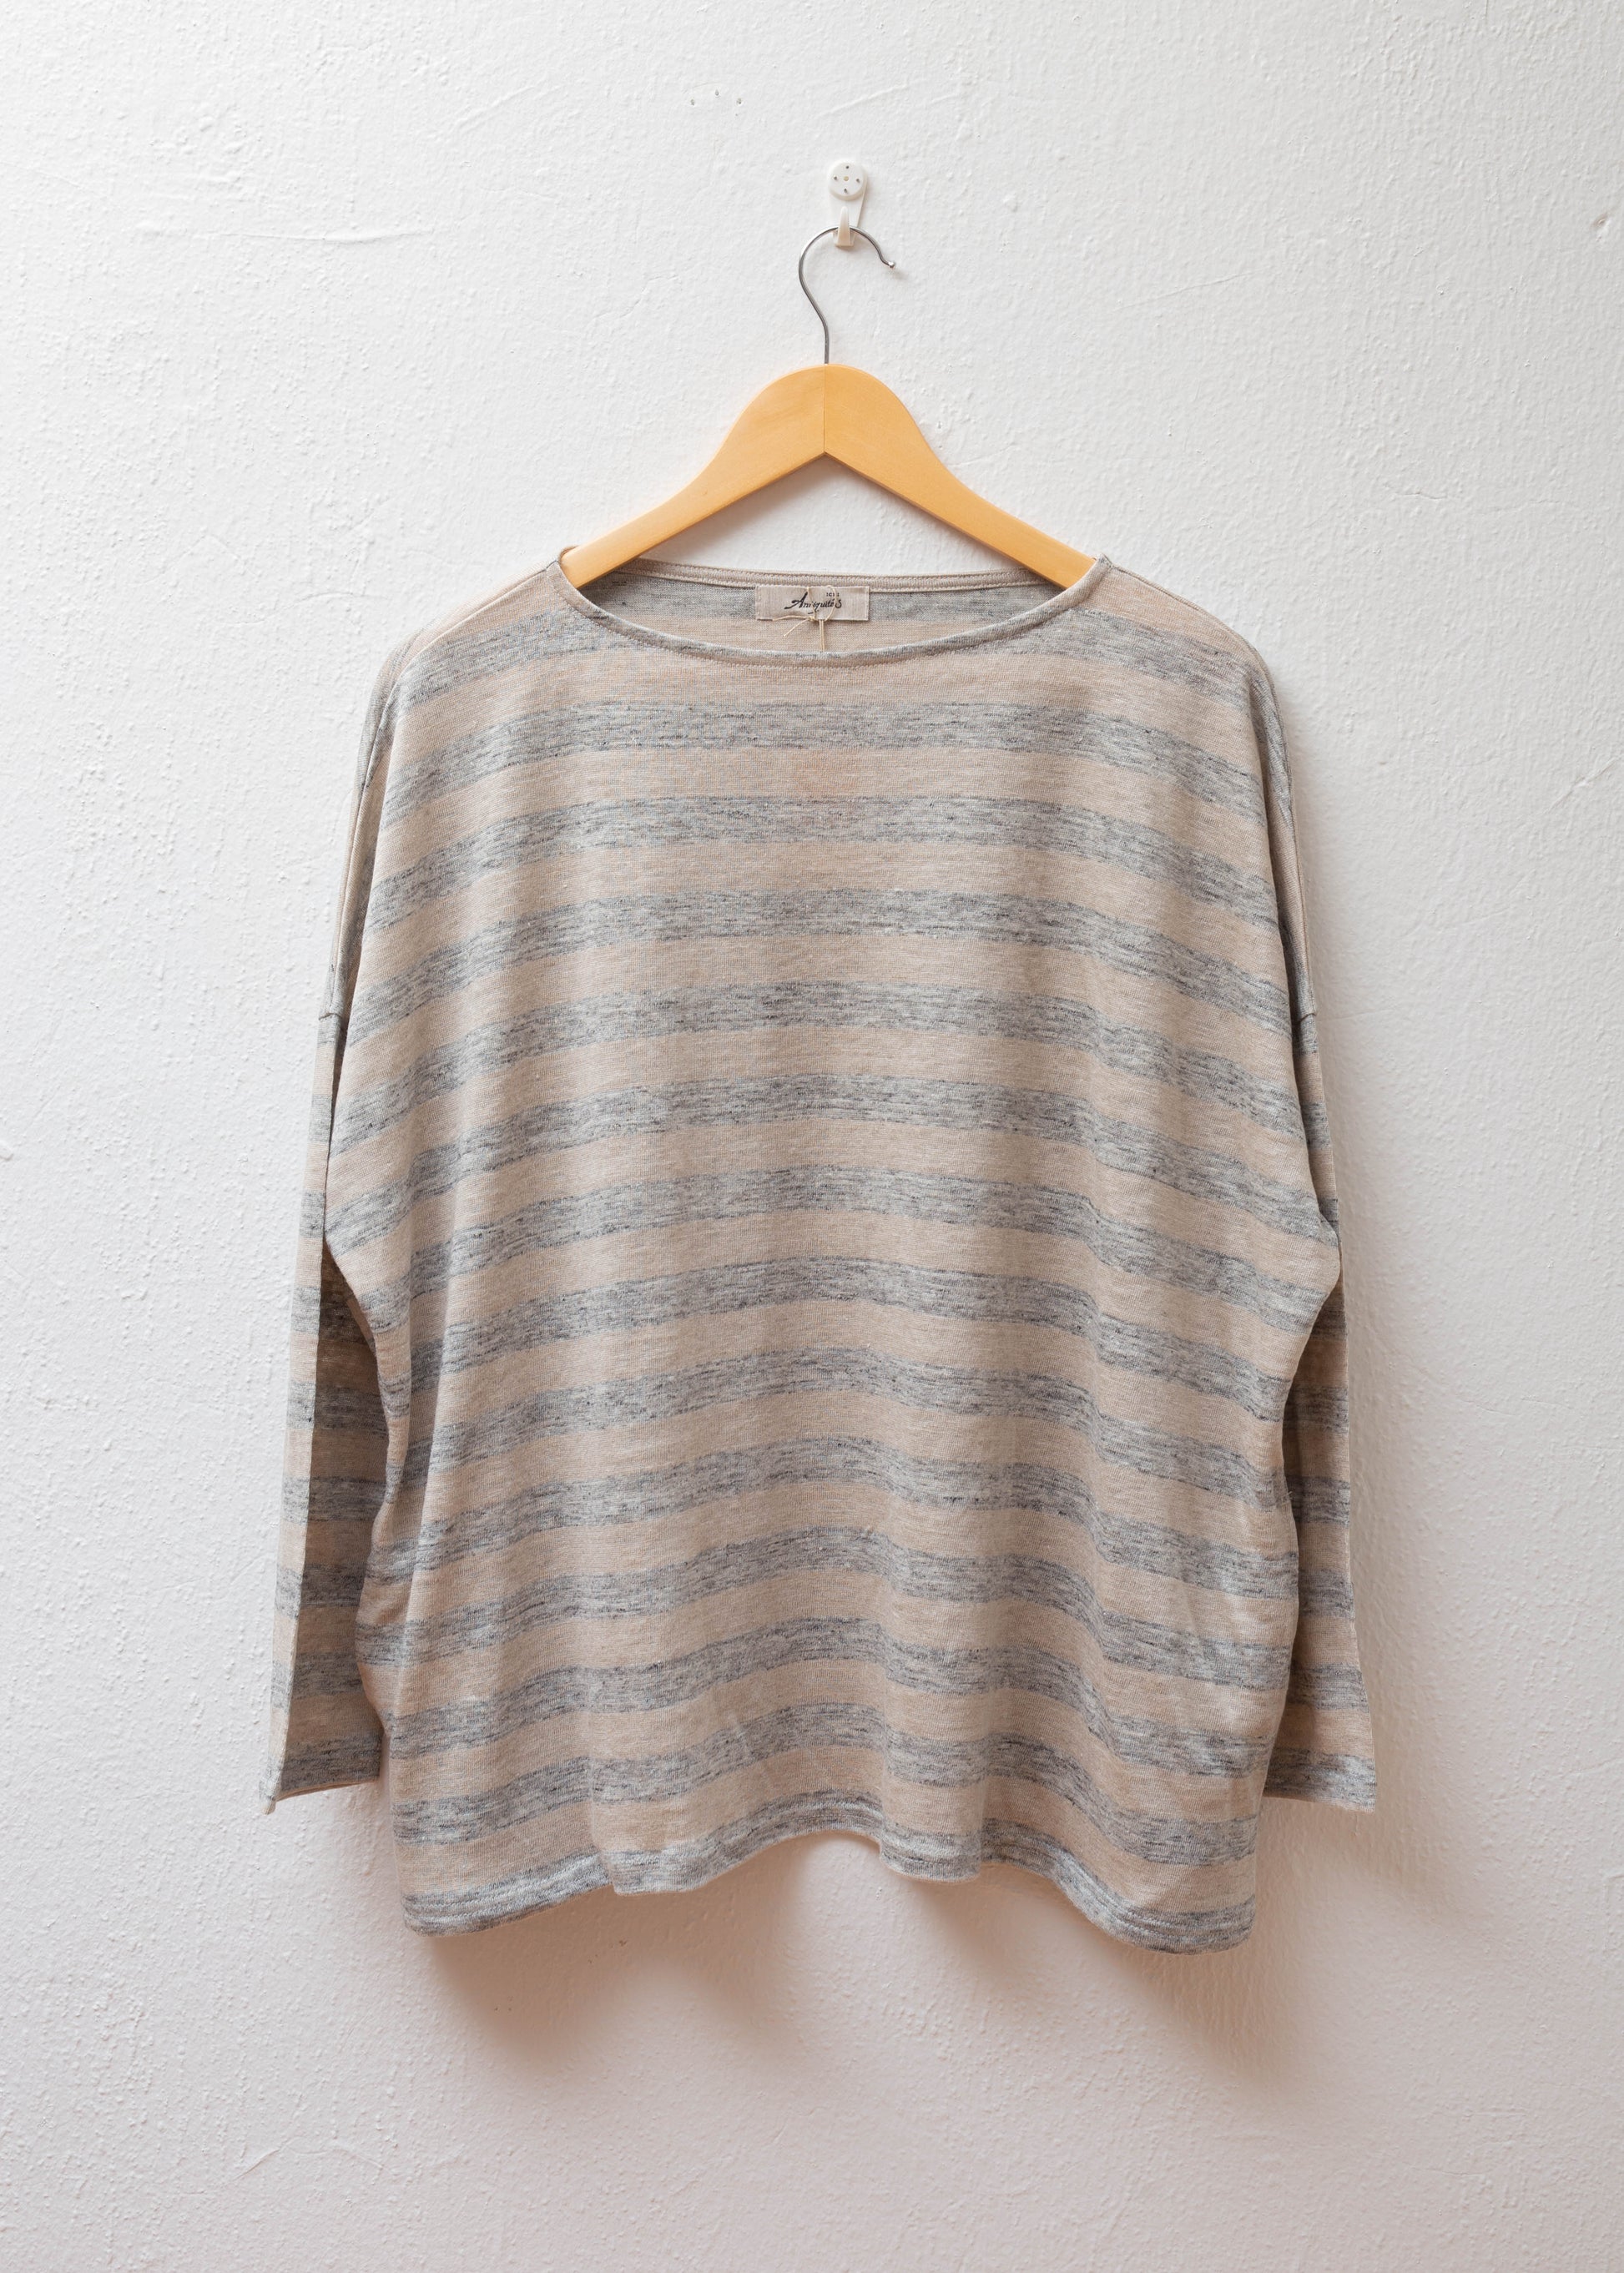 Linen Pullover in Natural/Grey hanging on a white wall